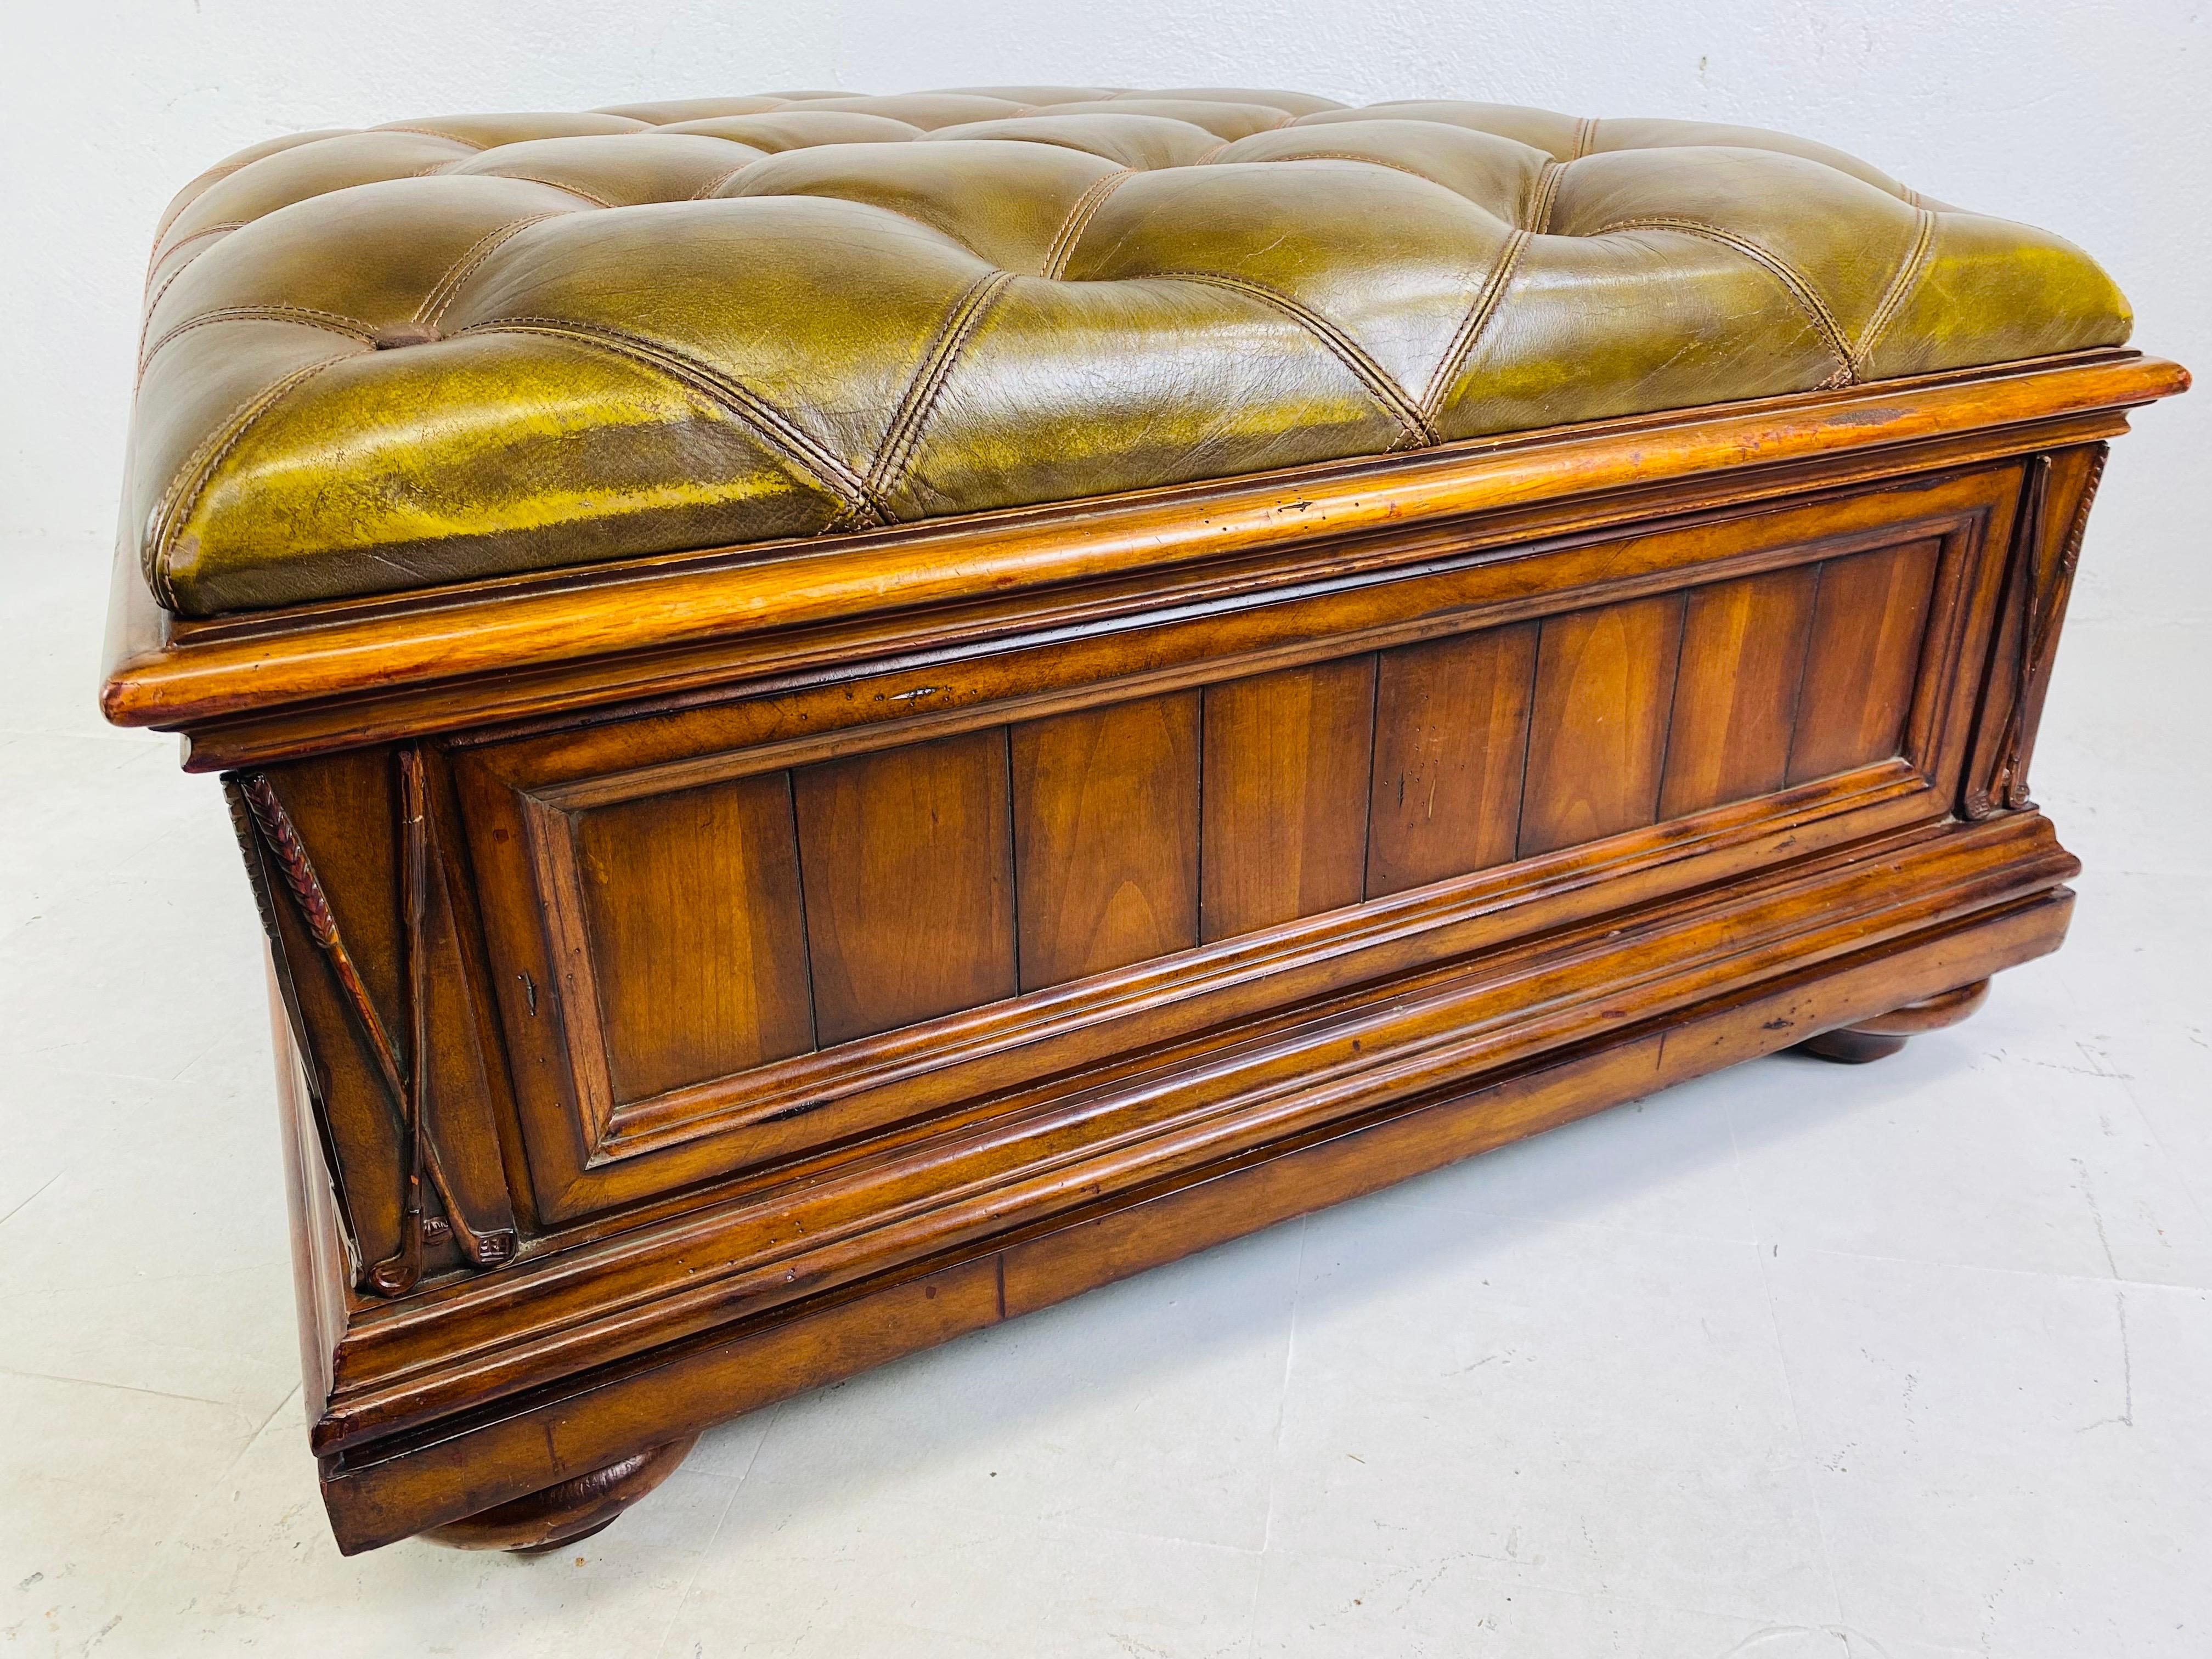 This is a handsome large oversized leather tufted library ottoman. The tufted ottoman features a beautiful olive green leather on the top and opens up to a finished walnut interior. The ottoman stands on four bun feet and has golf clubs carved into